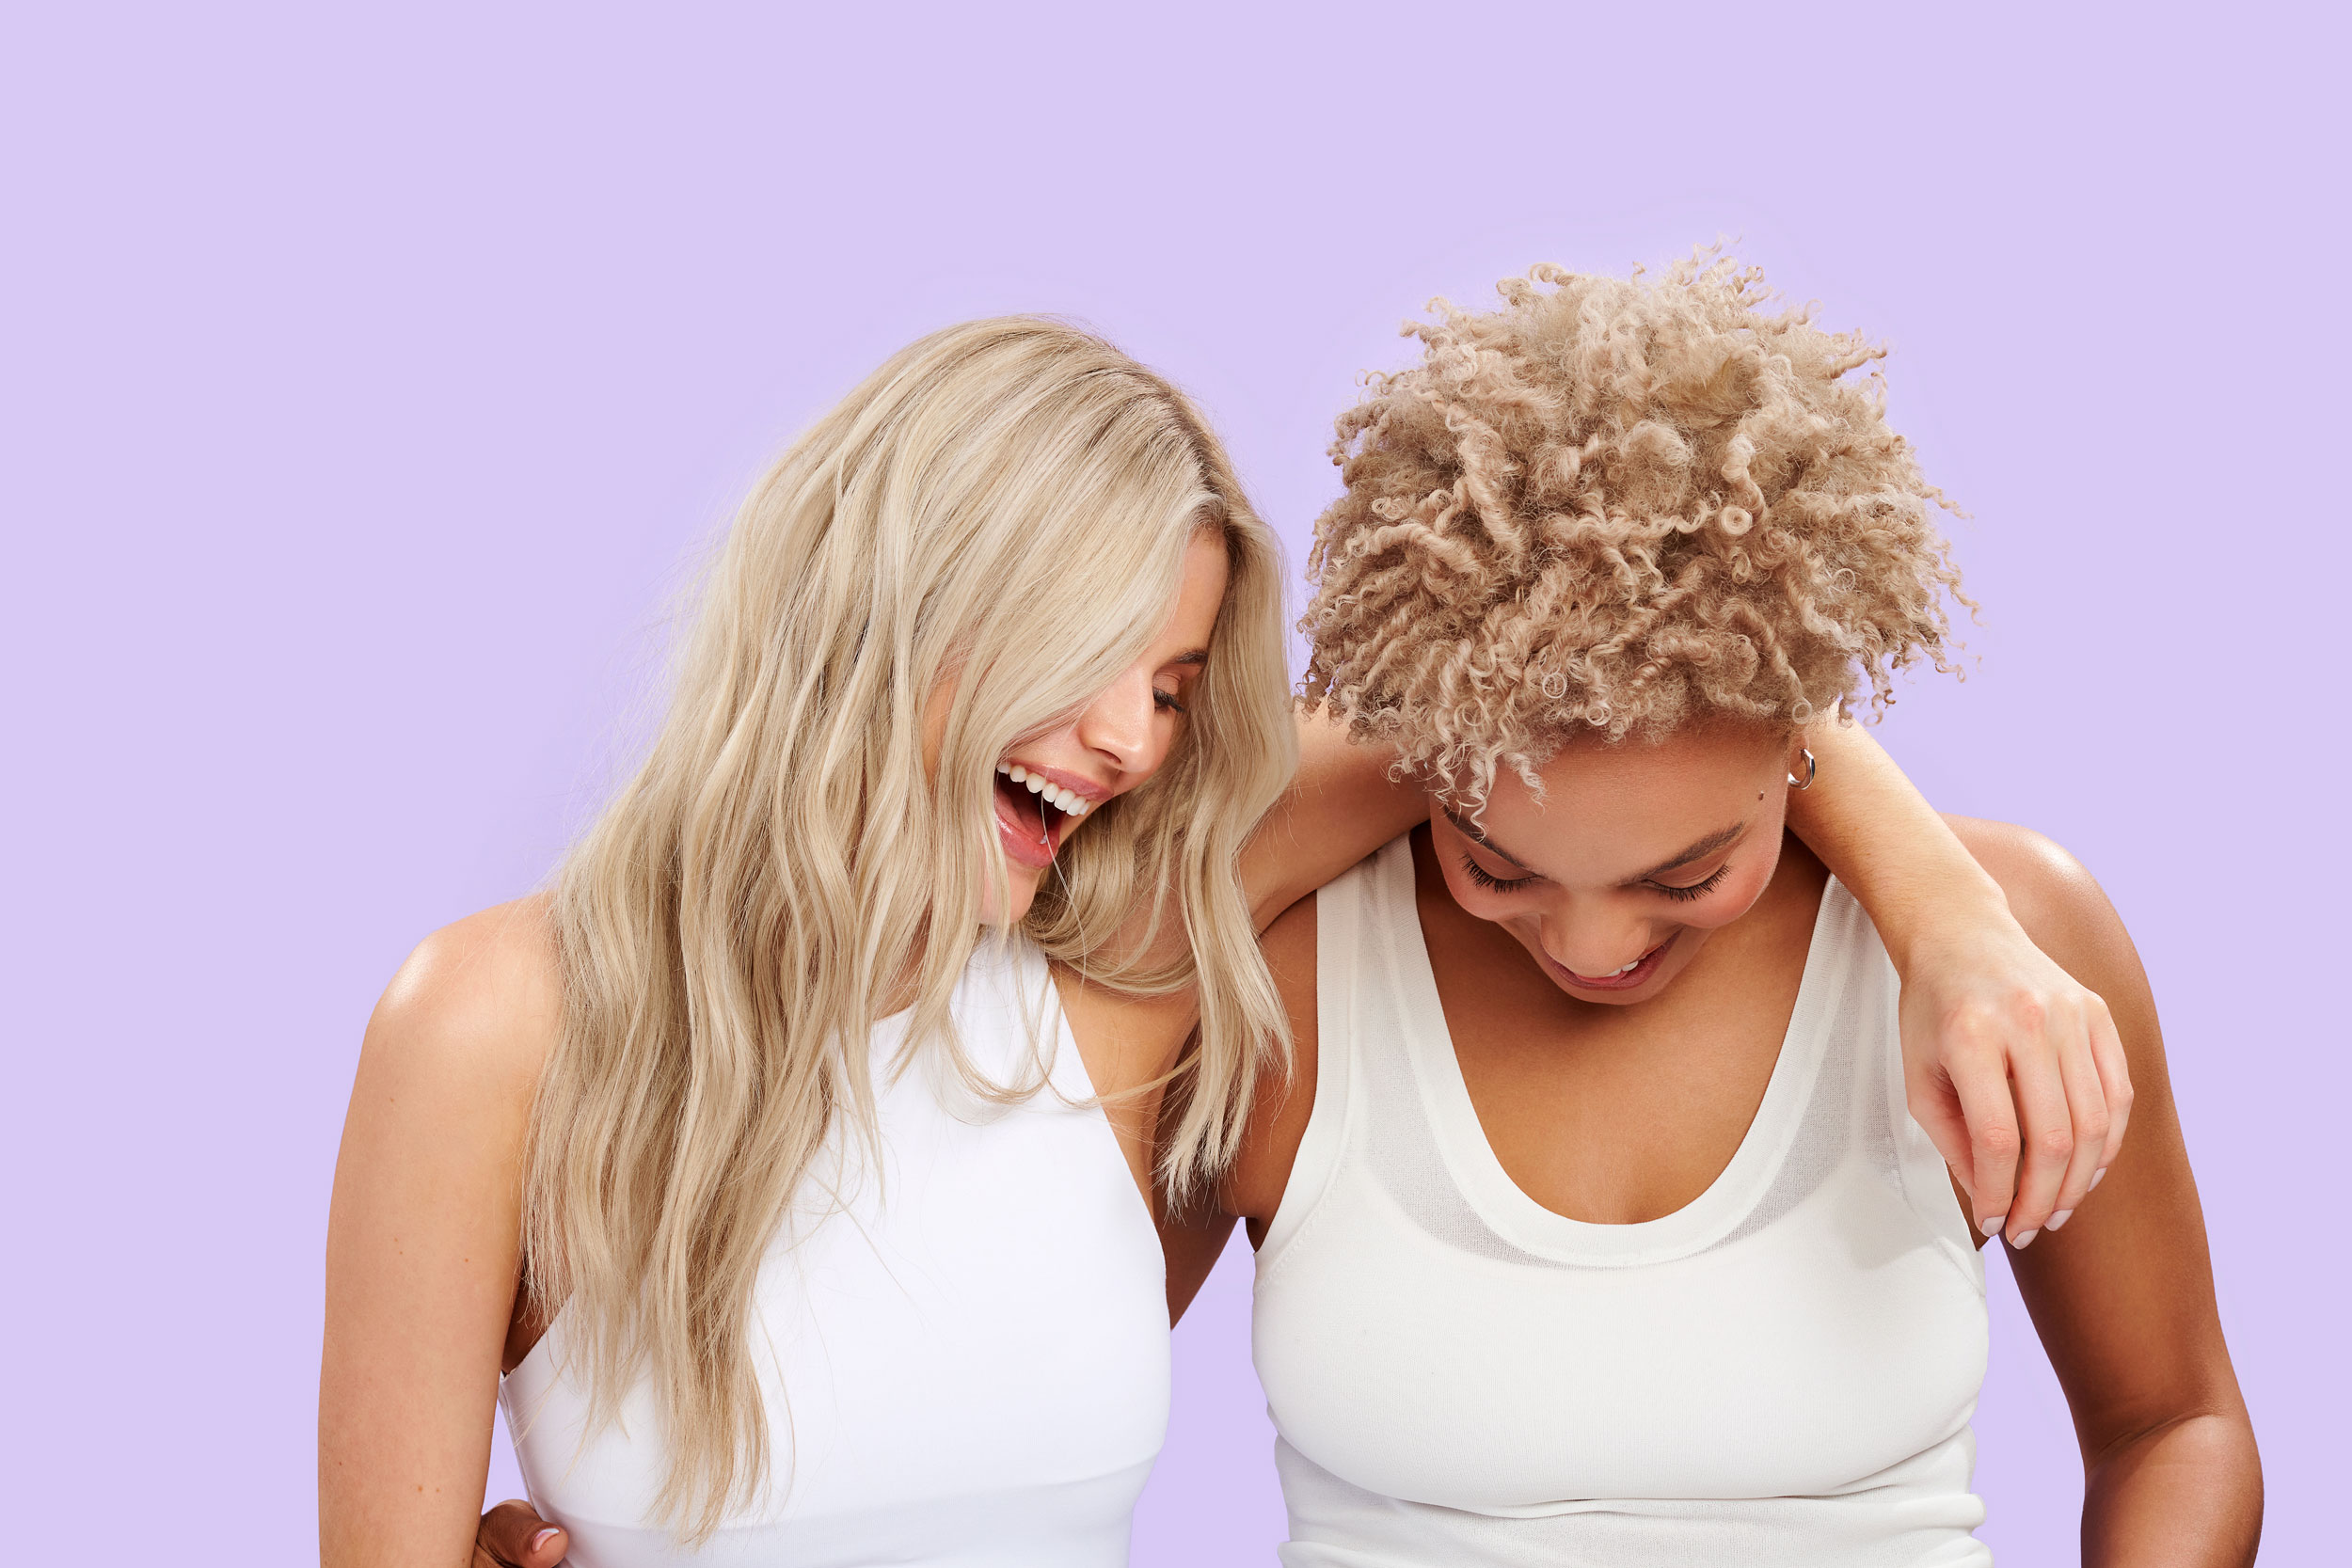 Two women laughing on purple background